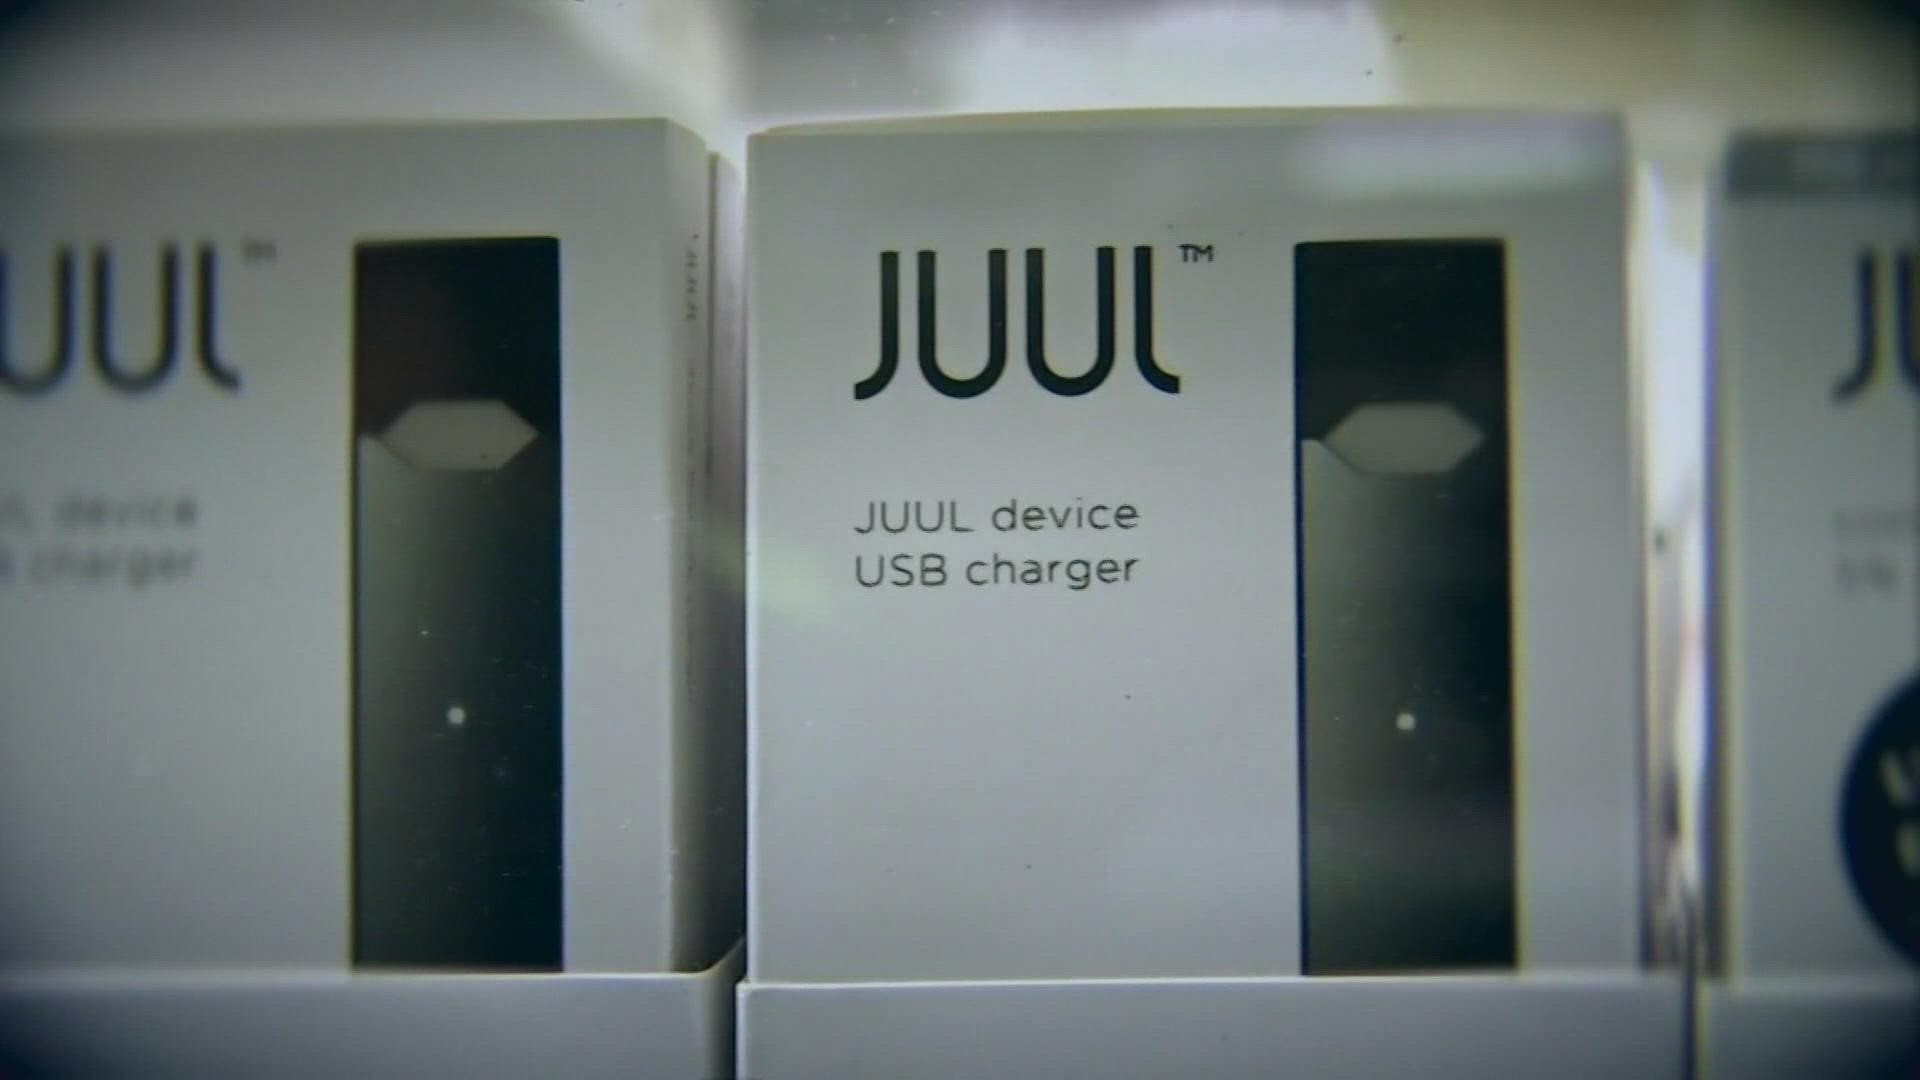 The settlement not only includes money, but also restrictions on marketing, sales and distribution of JUUL products within the state.